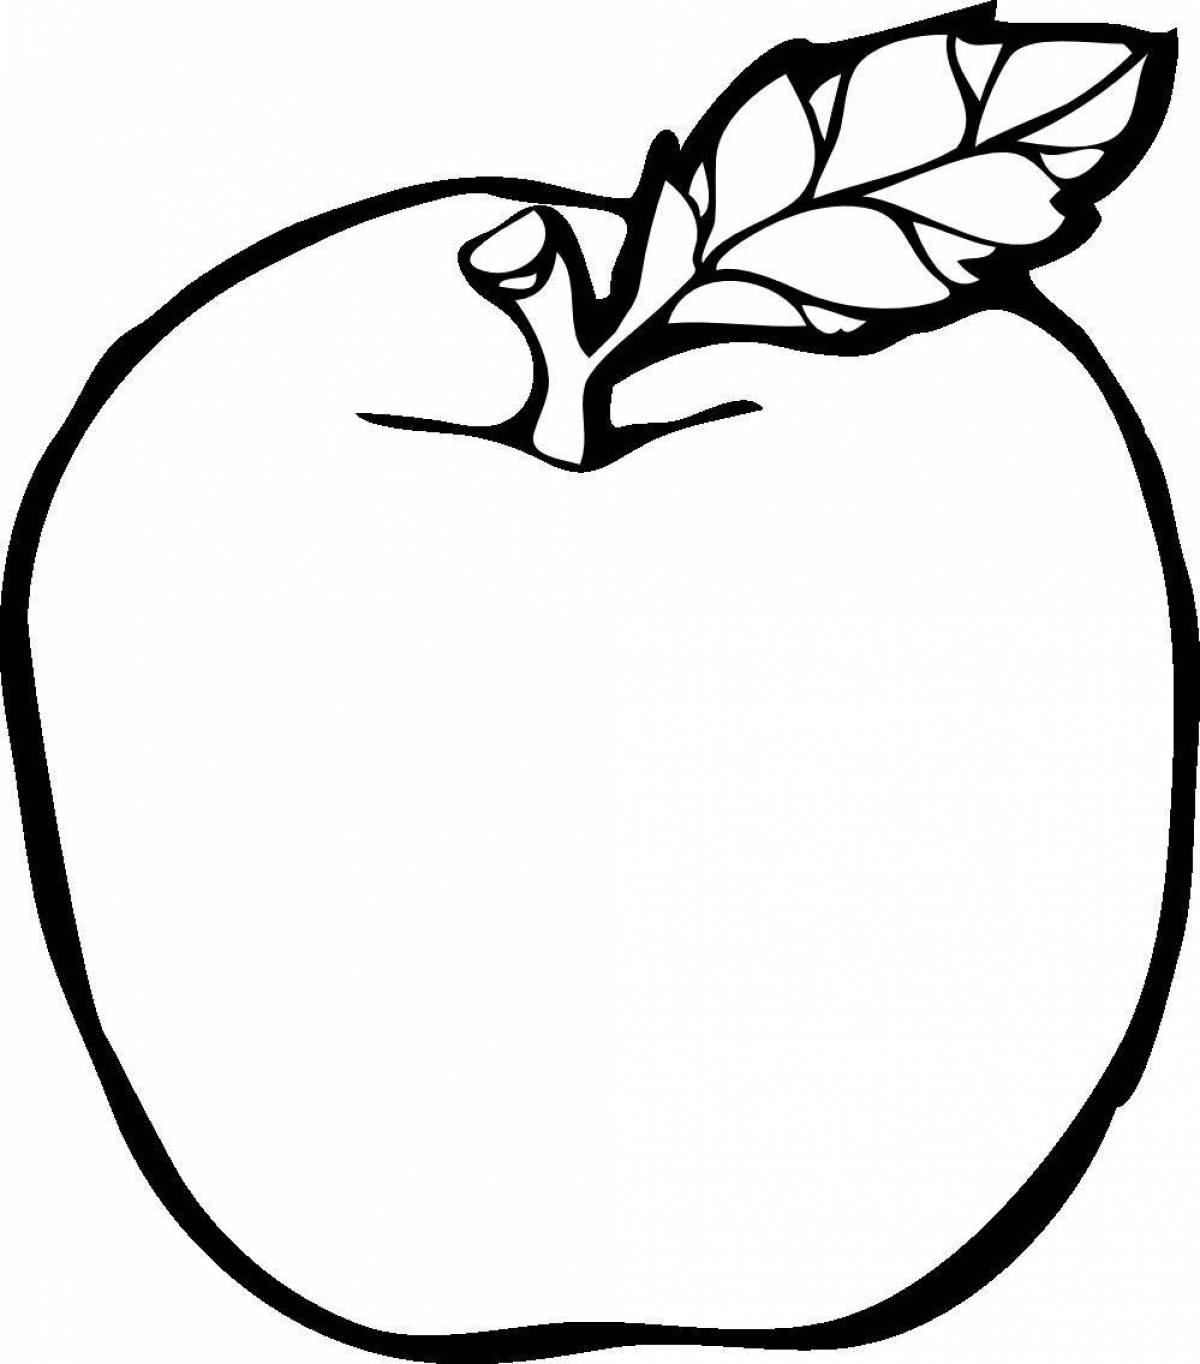 Creative apple coloring book for 3-4 year olds